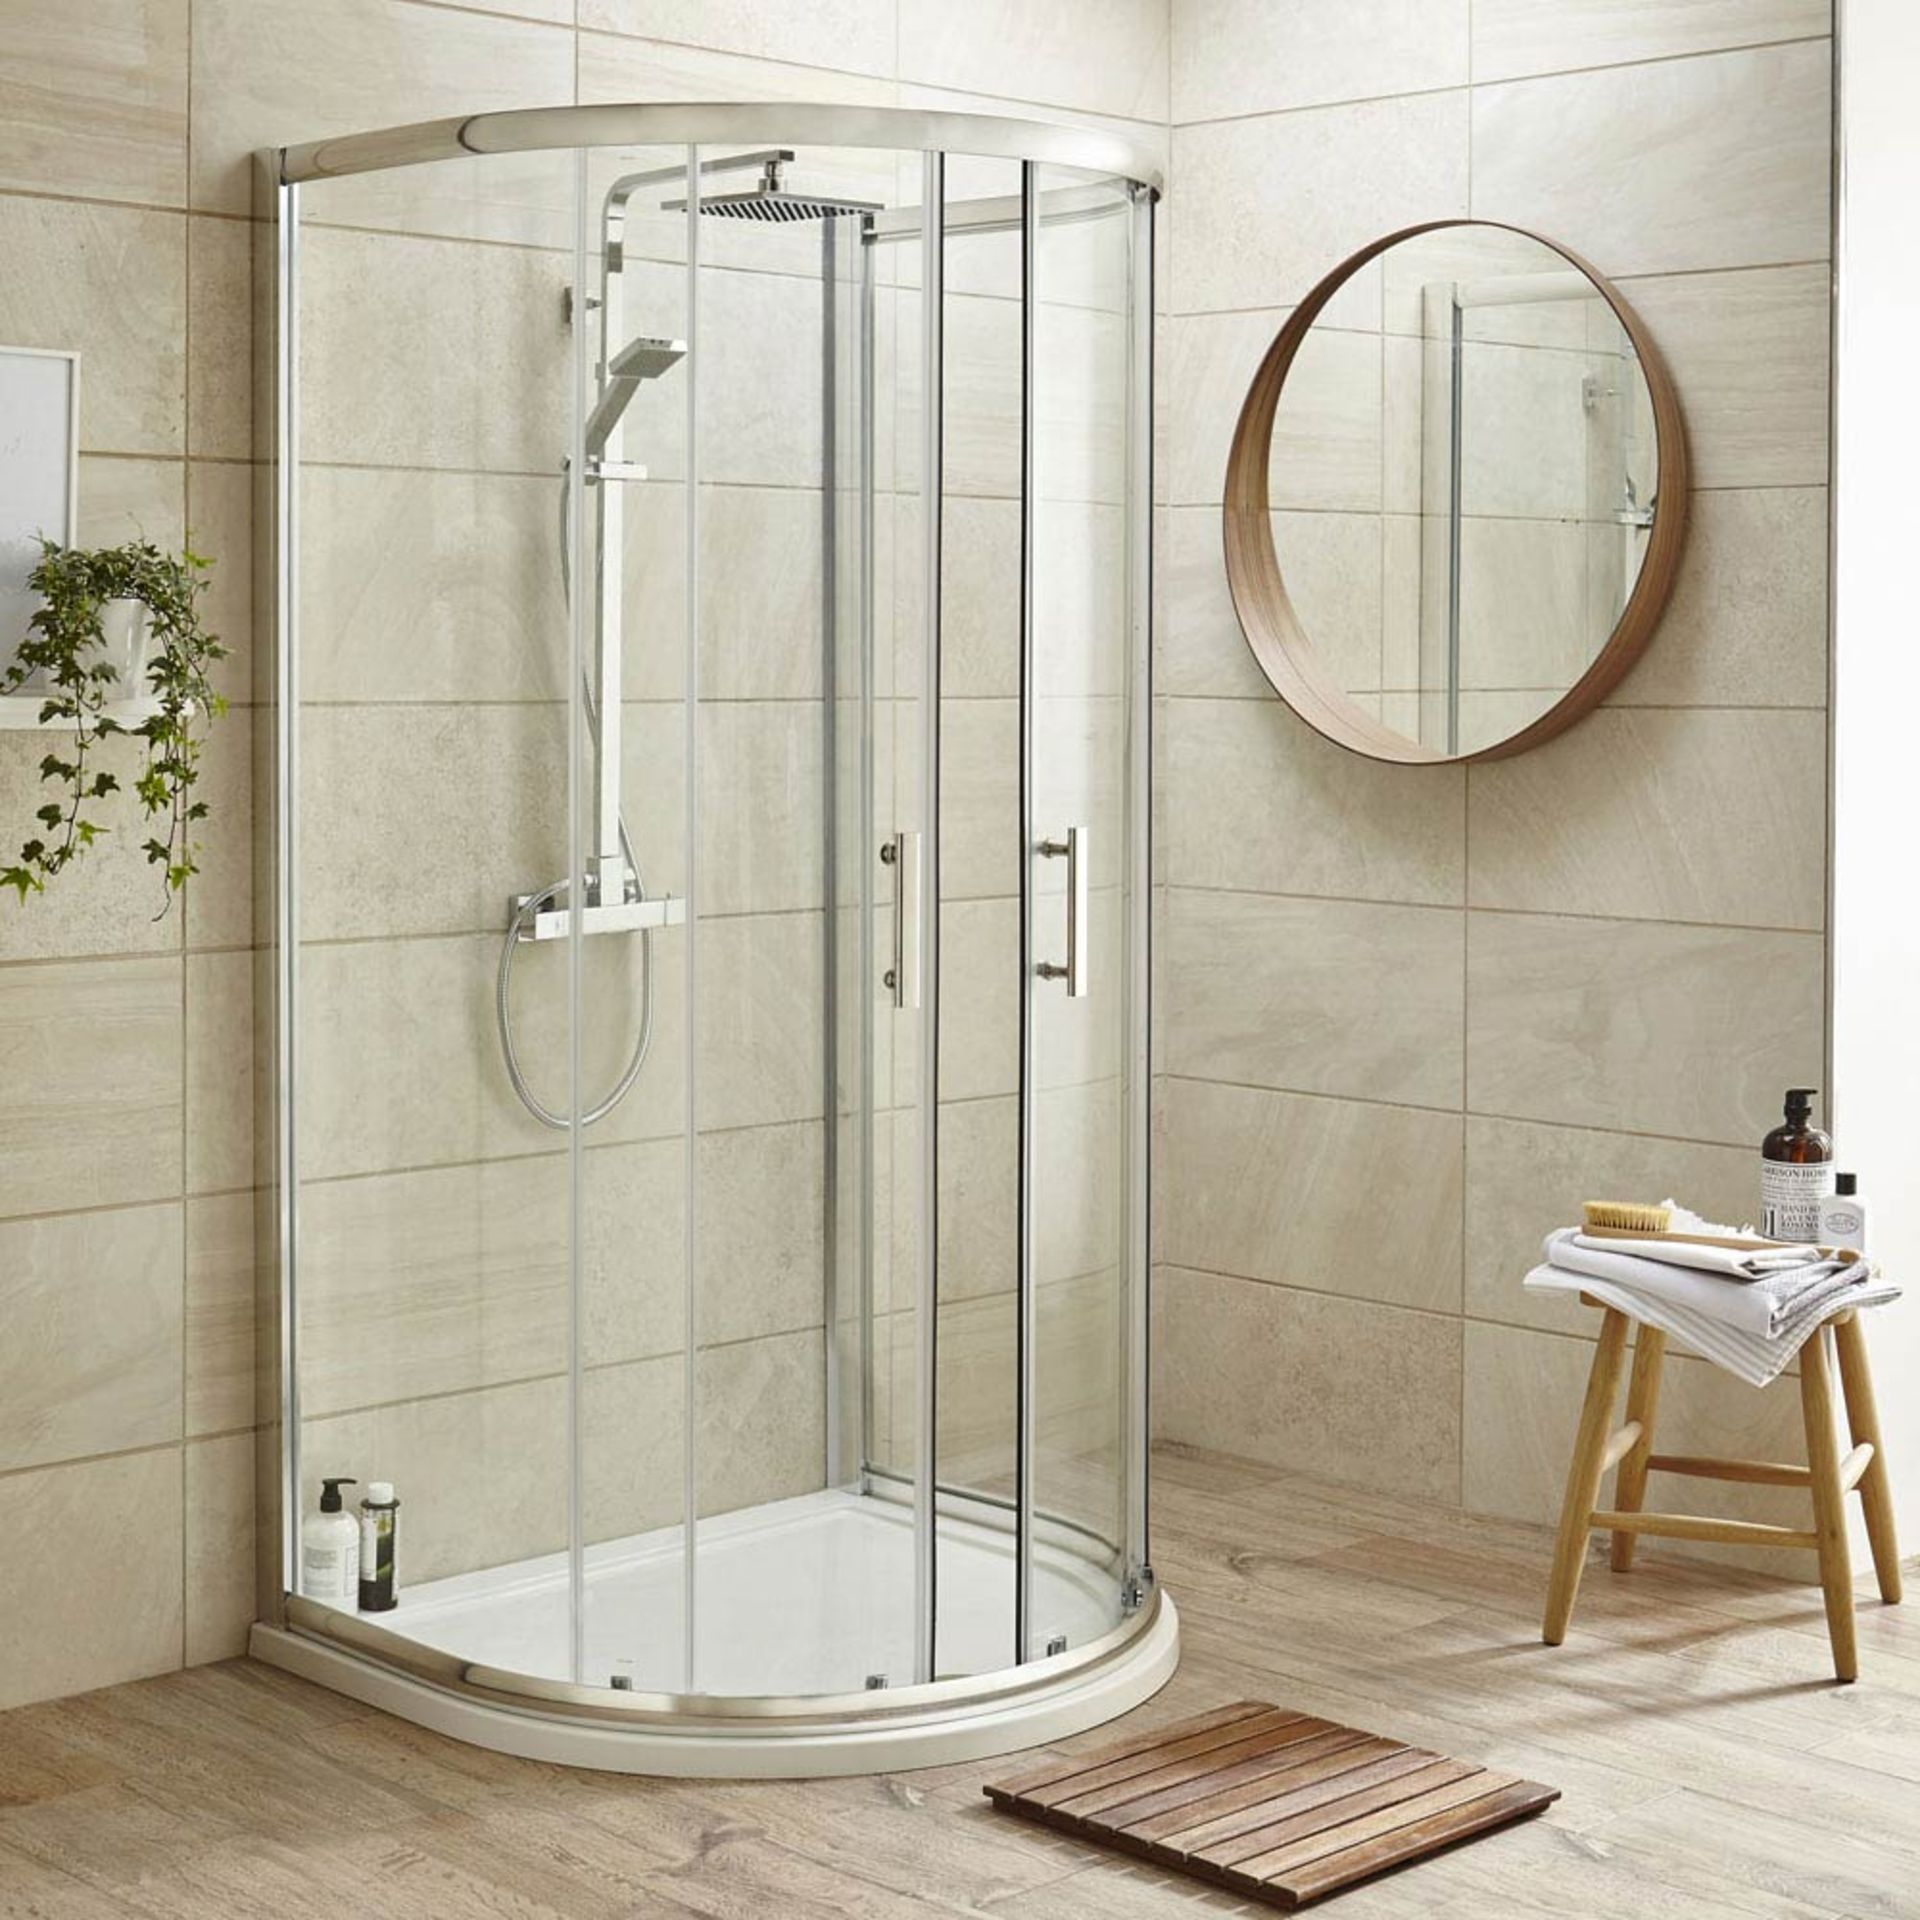 (PC129) Twyfords 770mm Hydro D Shape White Shower tray.Low profile ultra slim design Gel co... - Image 3 of 3